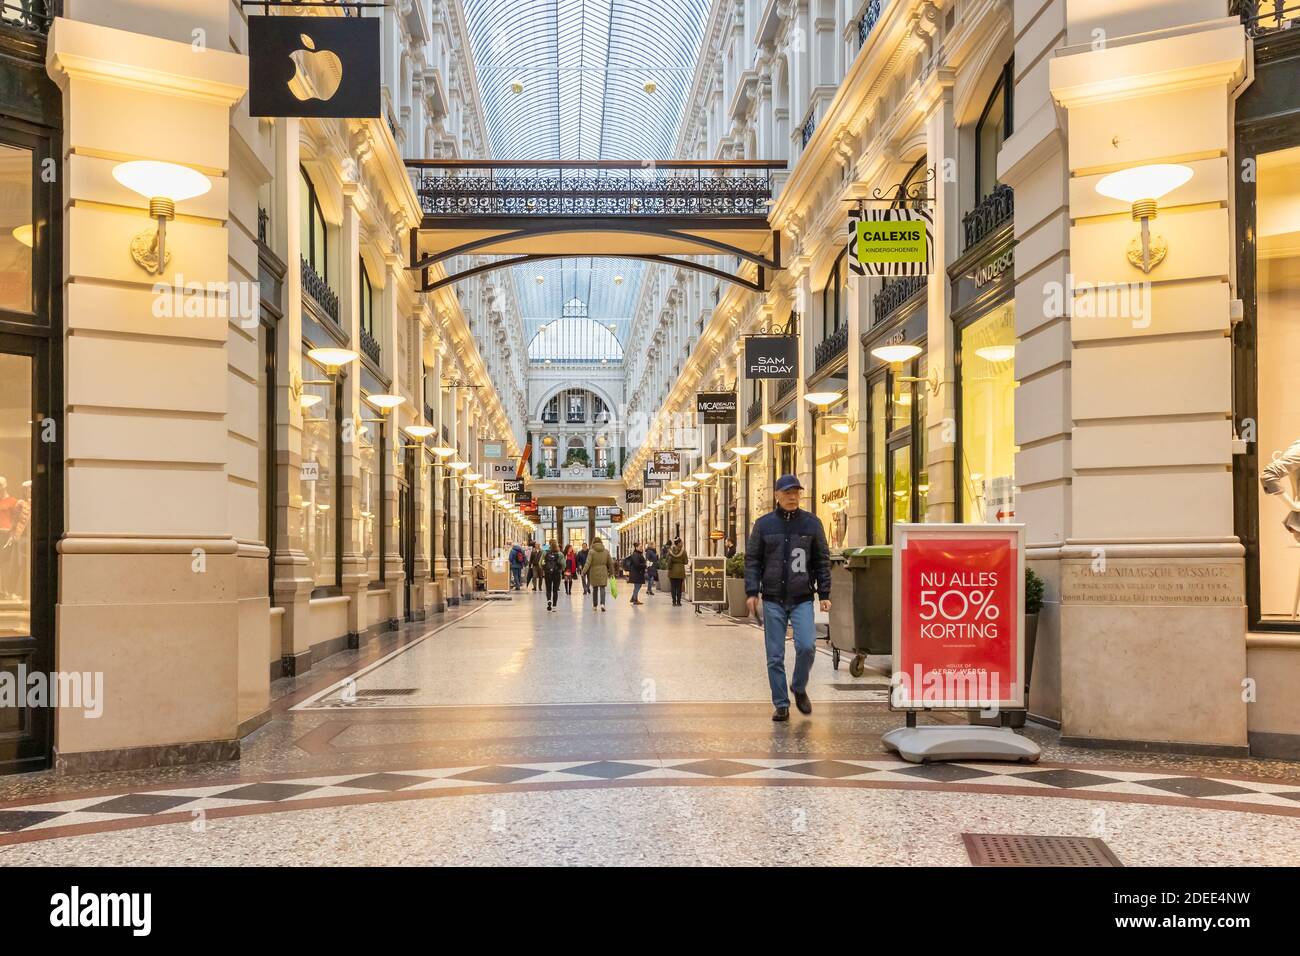 The Hague, The Netherlands - January 15, 2020: View at the indoor ancient mall Haagsche Passage in the city centre of The Hague, The Netherlands Stock Photo